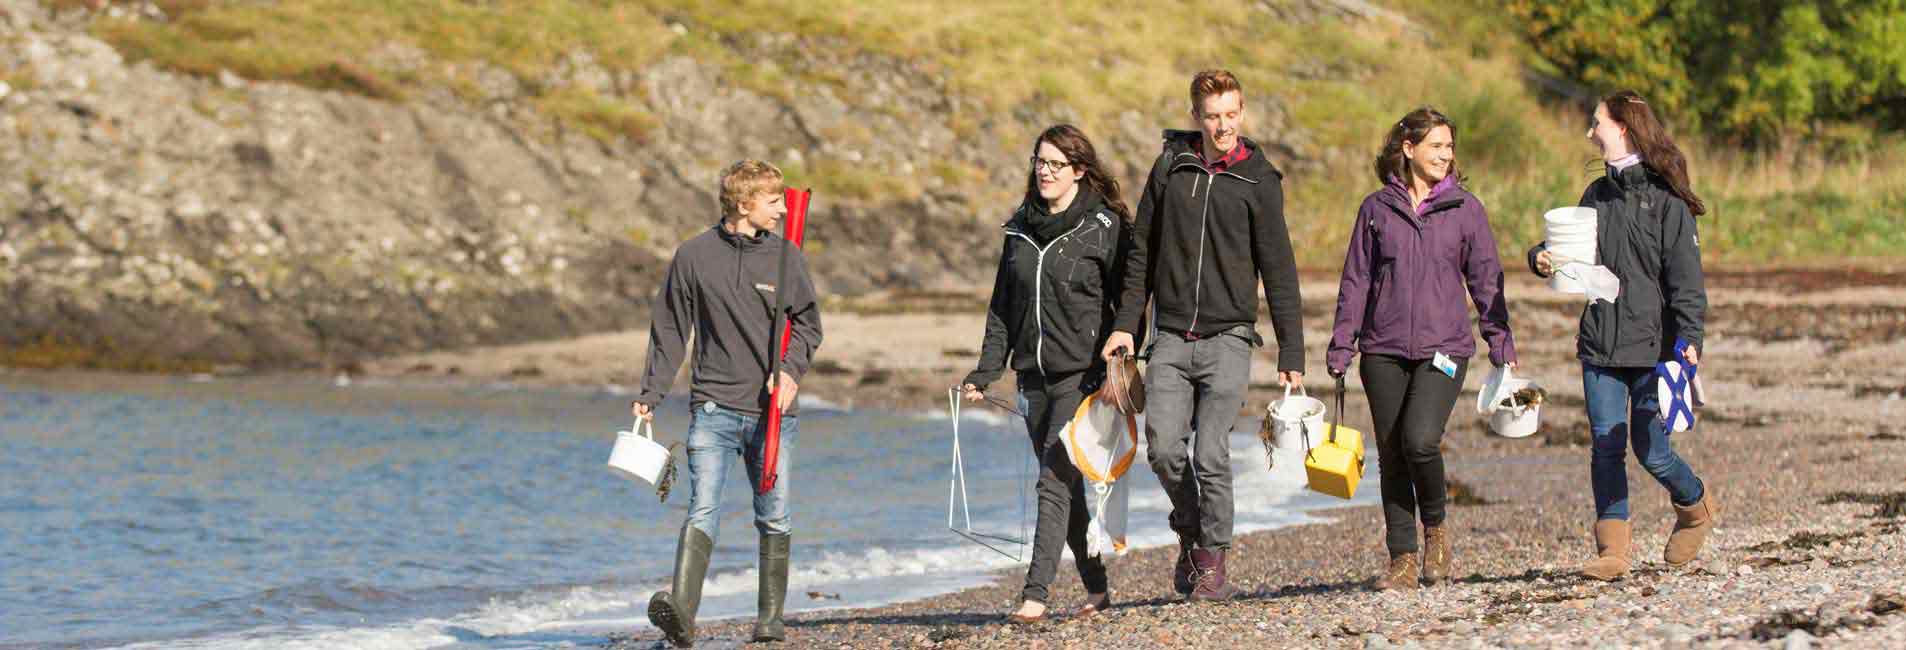 The picture shows a group of fresh-faced marine science undergraduate students walking on the beach with some of their fieldwork equipment